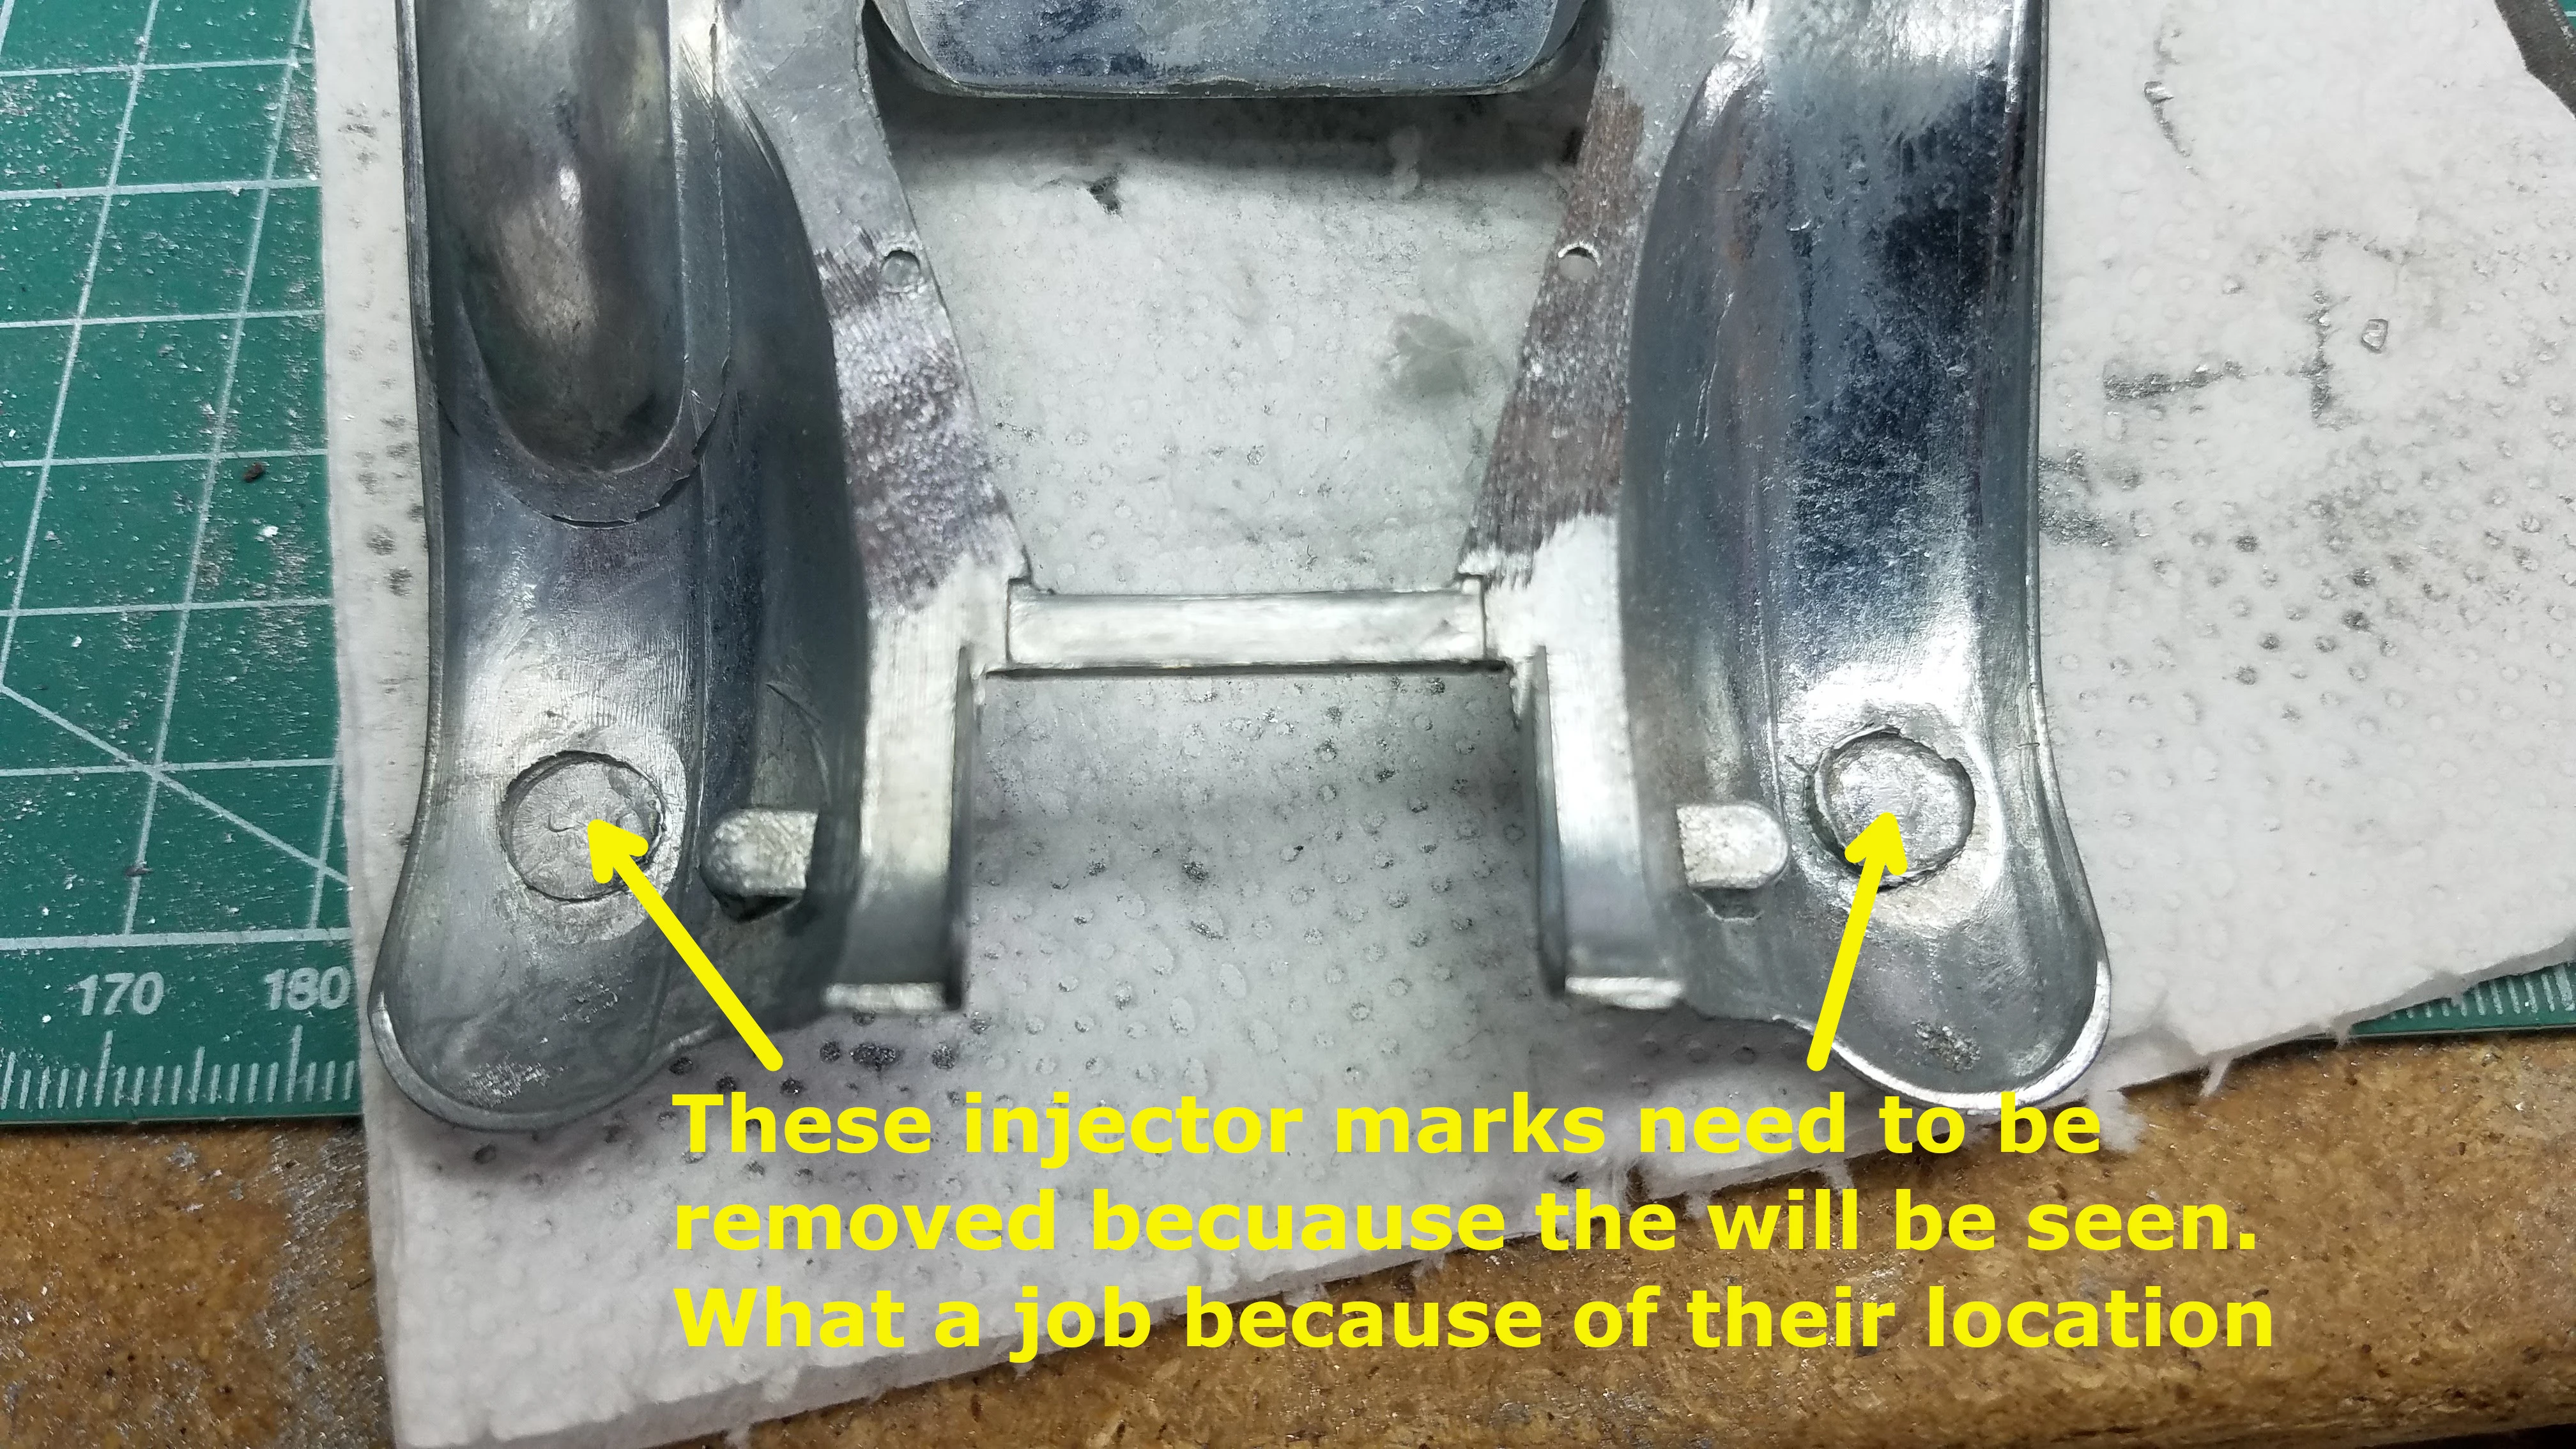 Large injector pin marks in the front fender wells